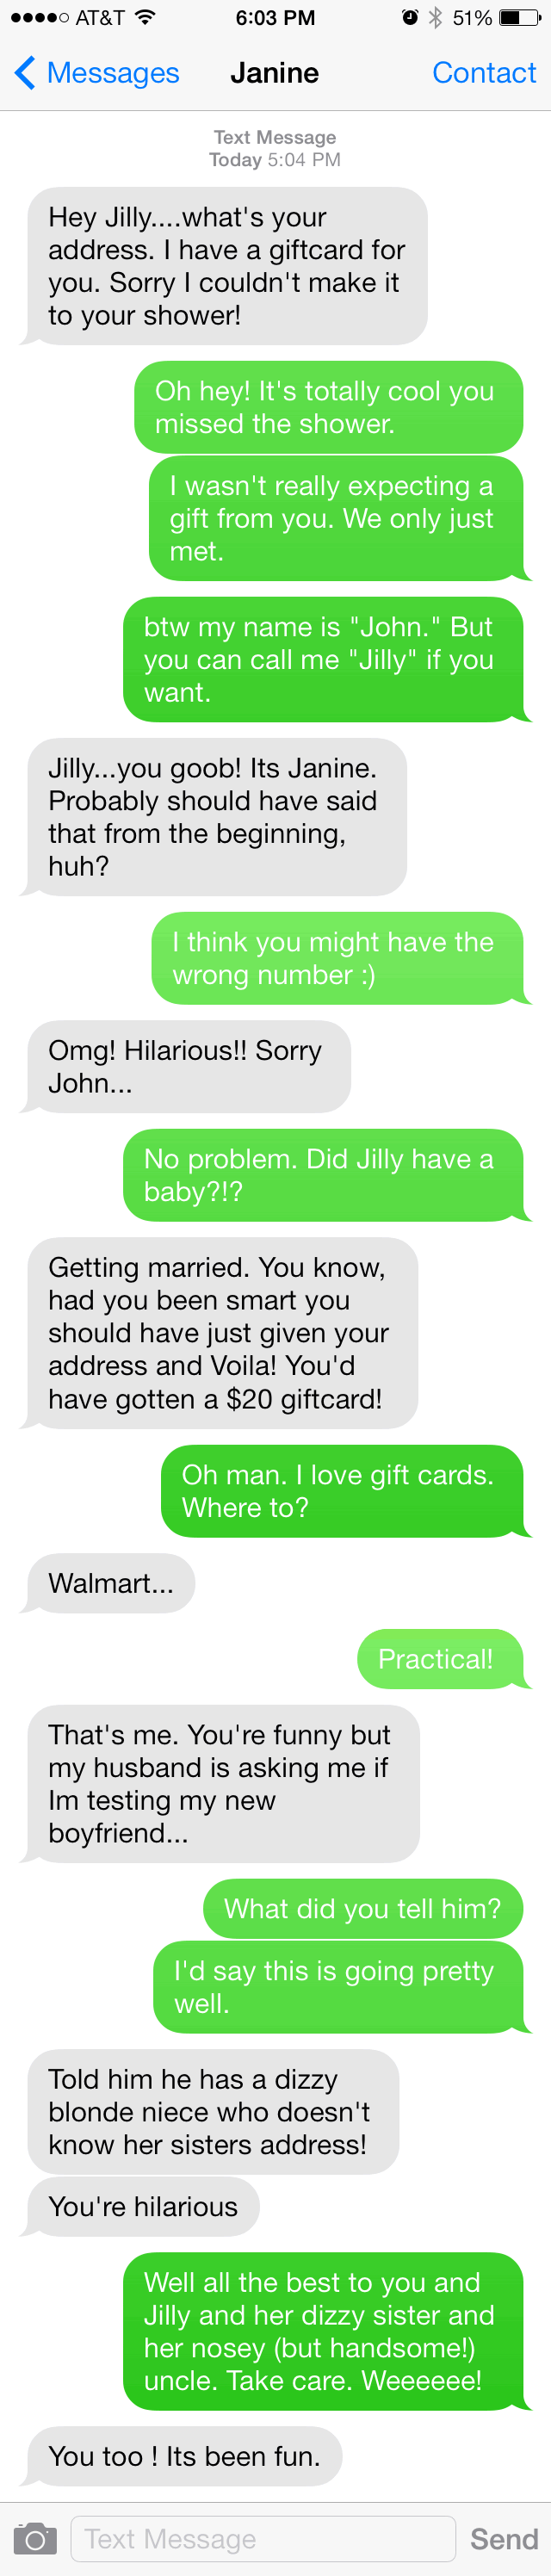 Janine - Text Message Wrong Number